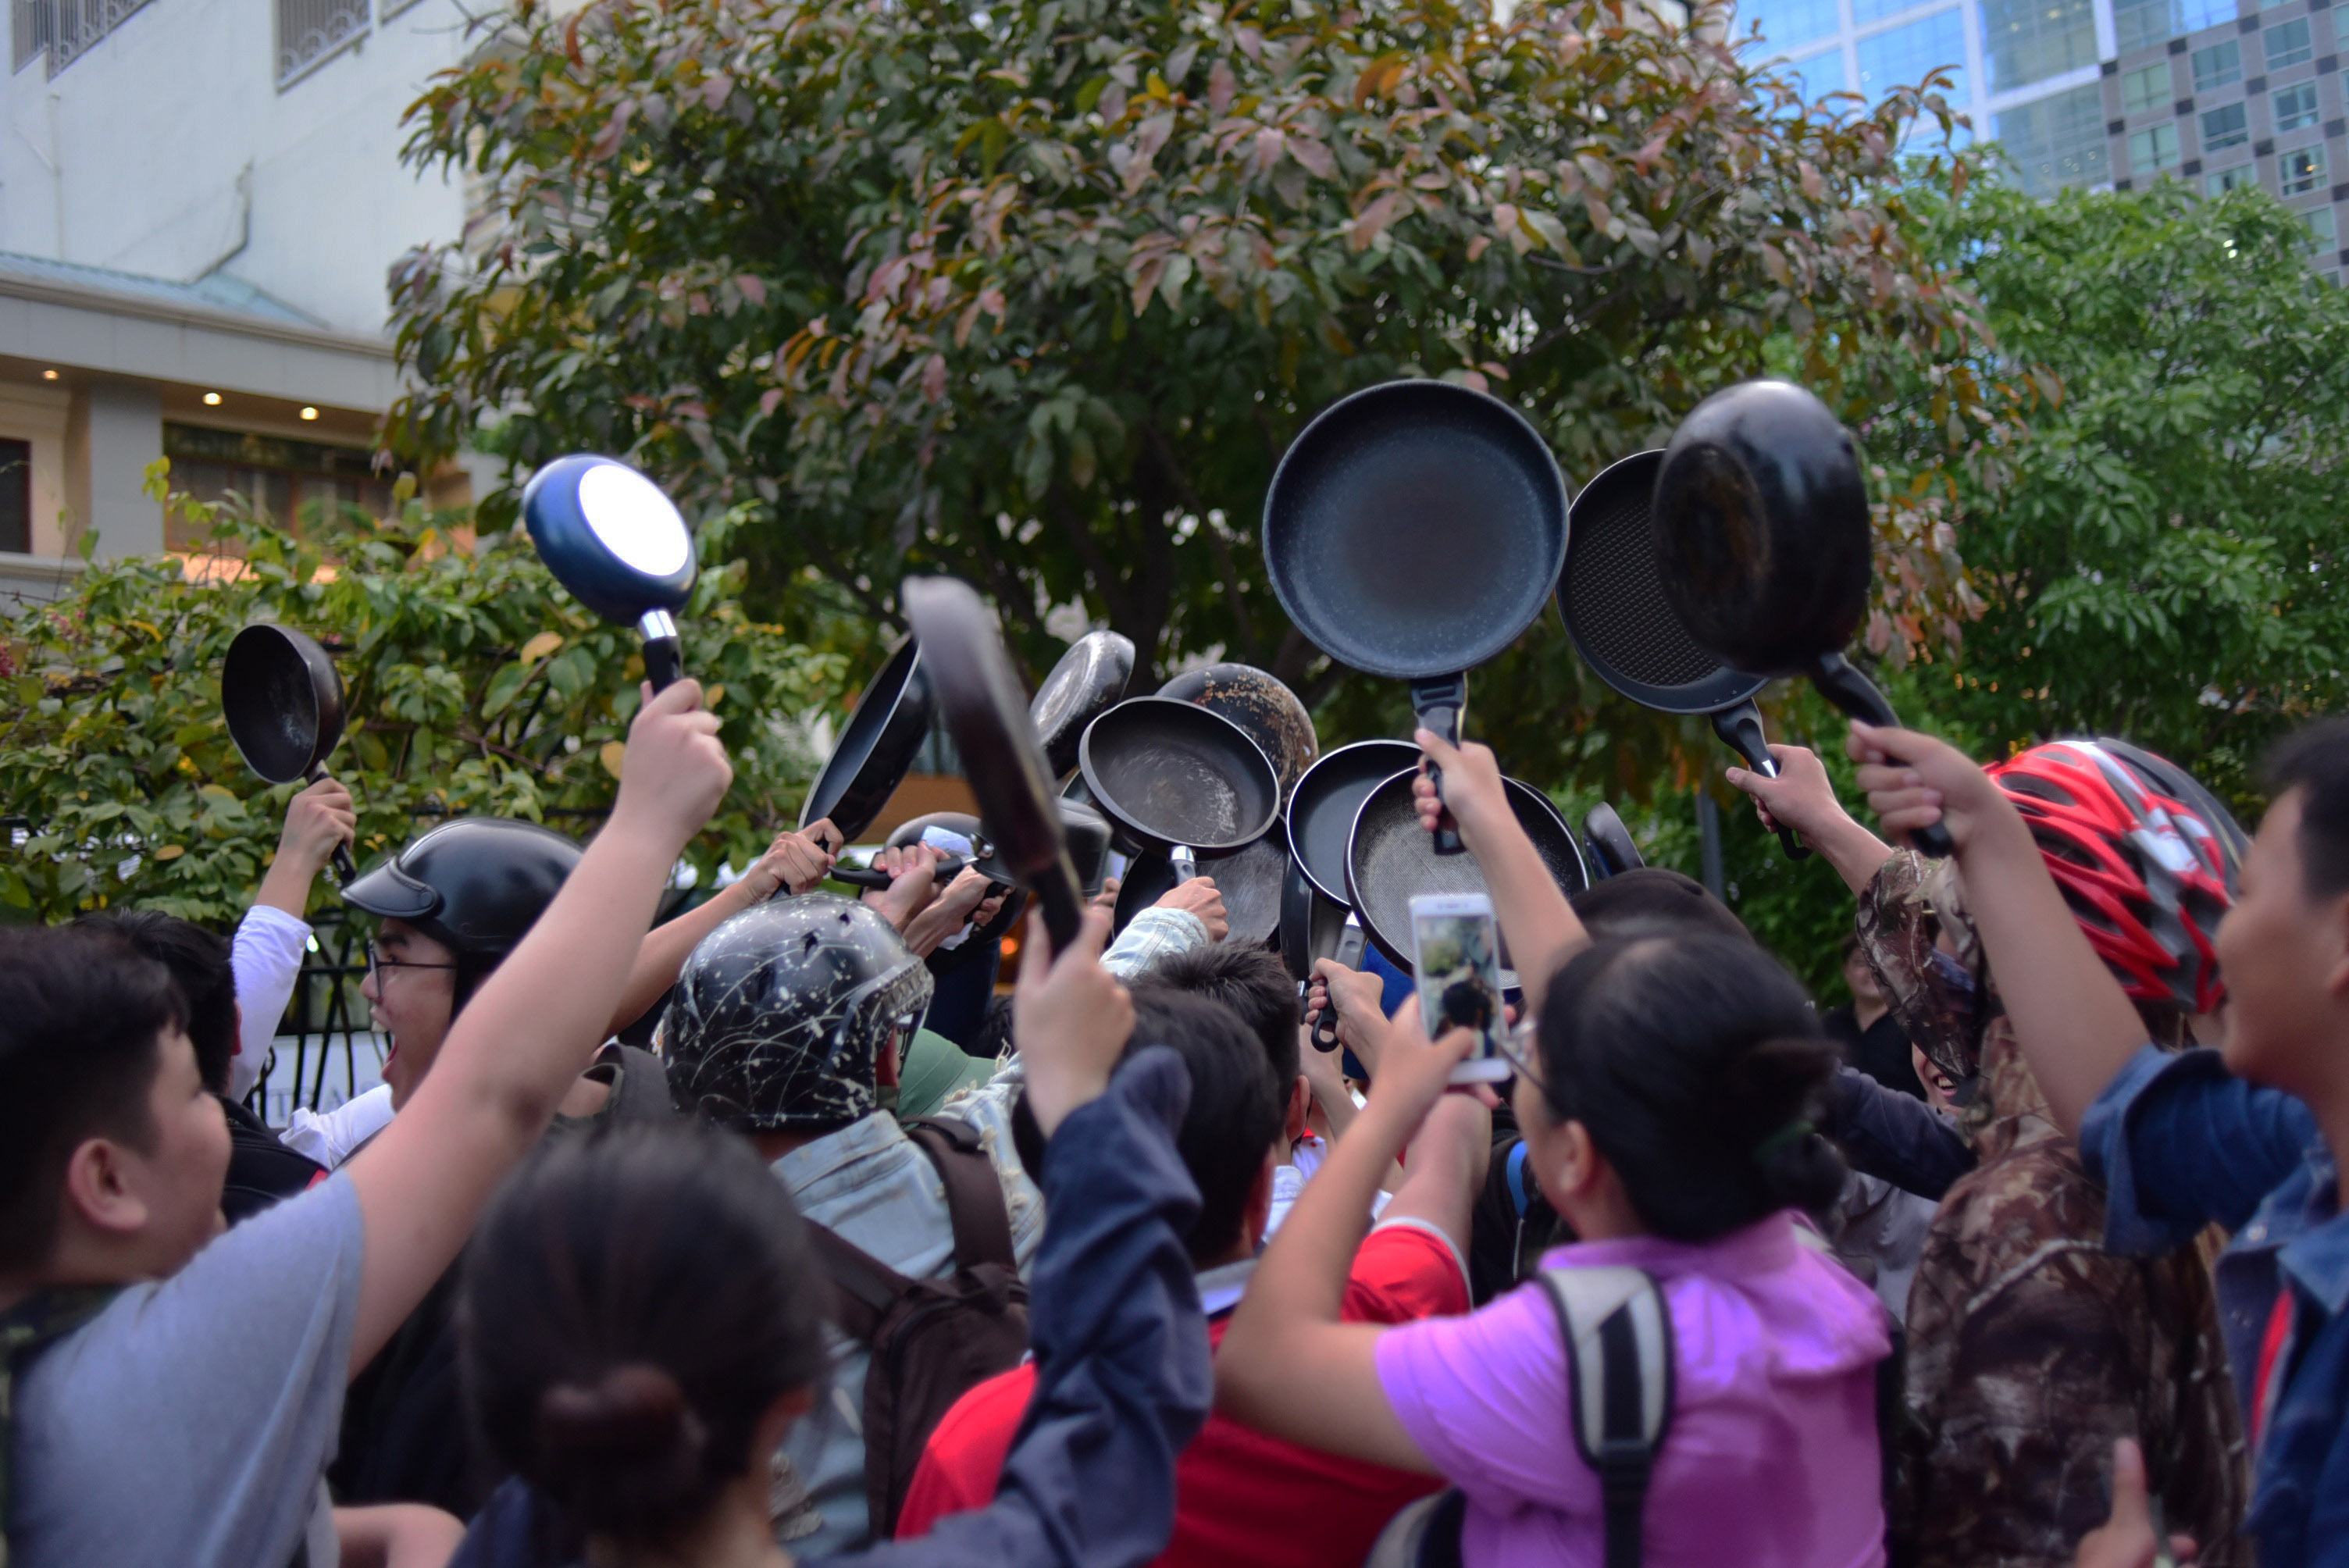 They cheer with the frying pans as part of multiple activities.